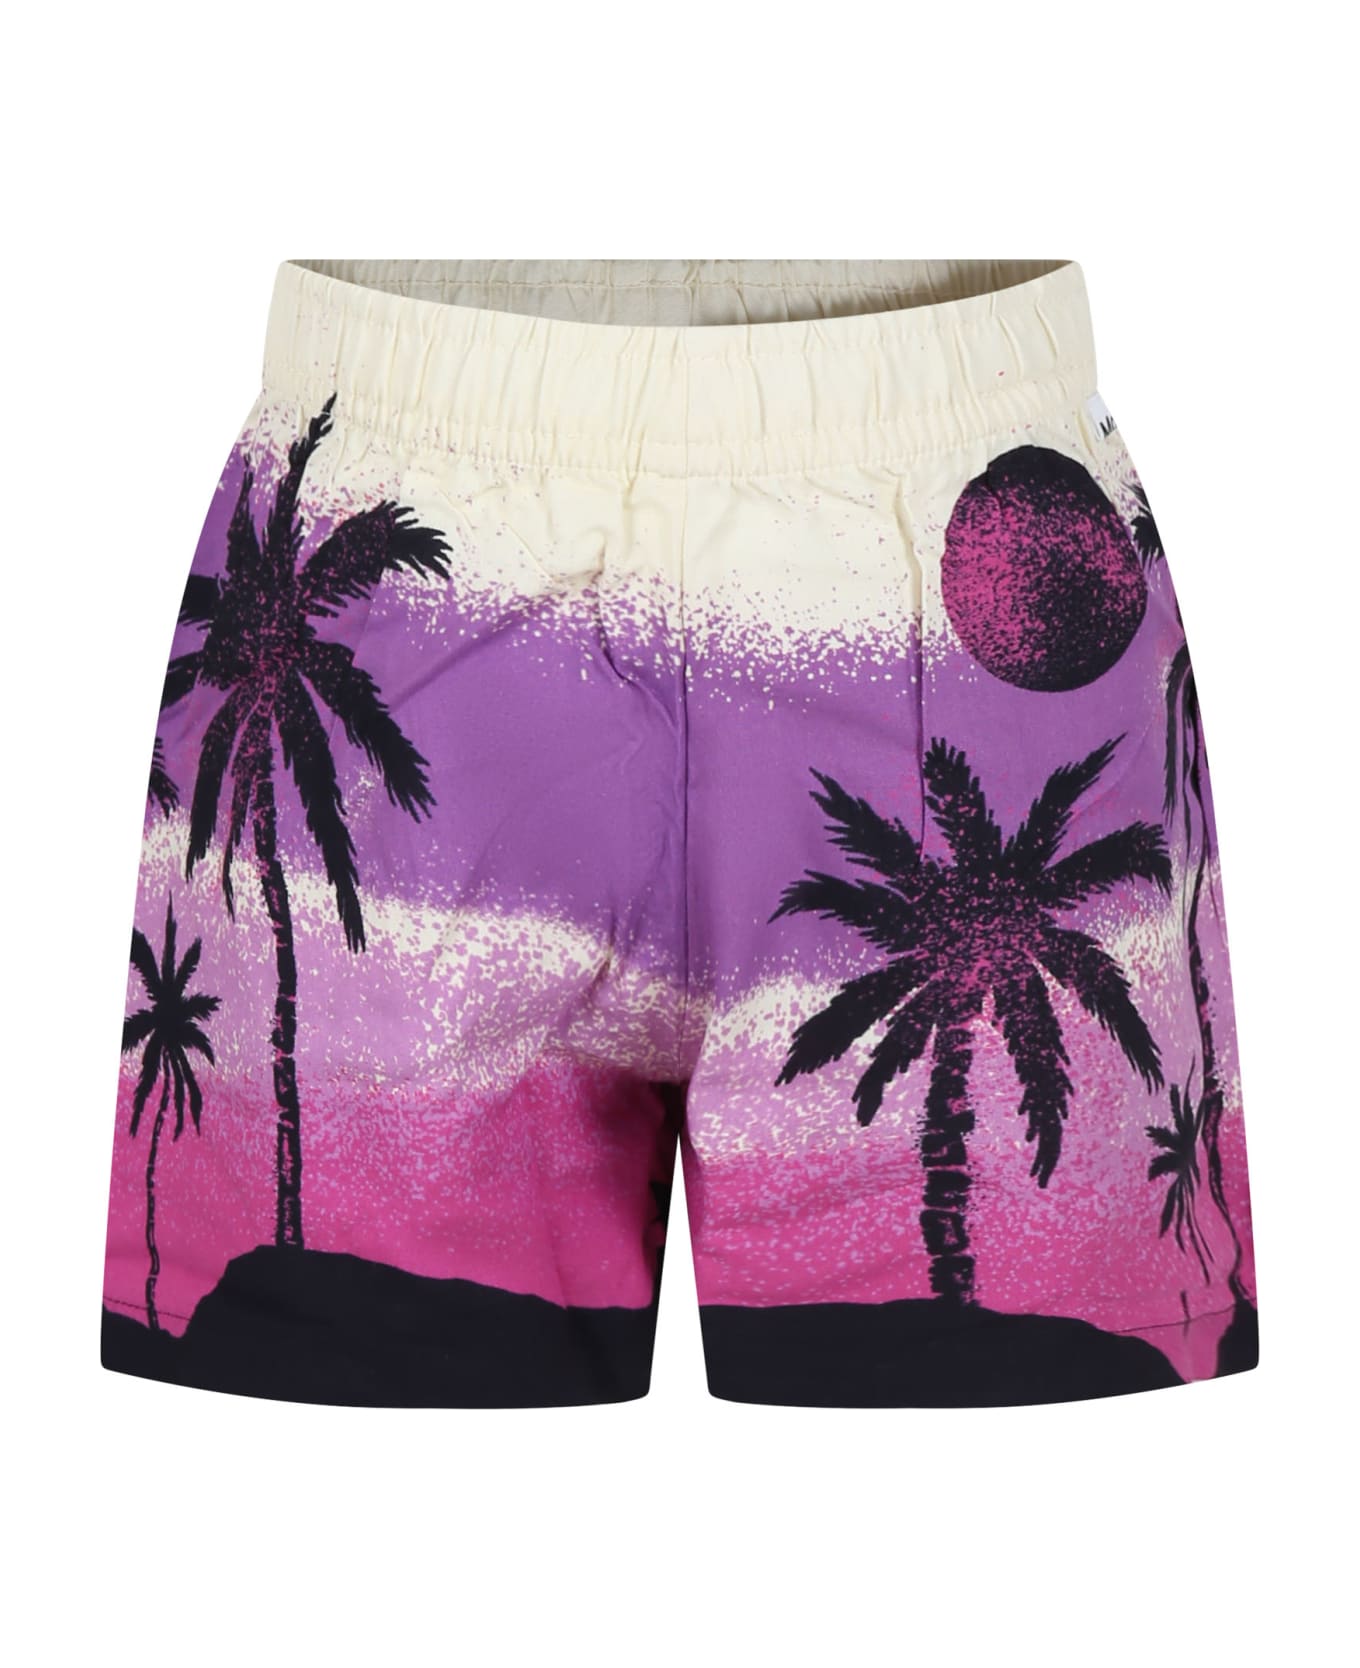 Molo Ivory Shorts For Girl With Palm Print - Multicolor